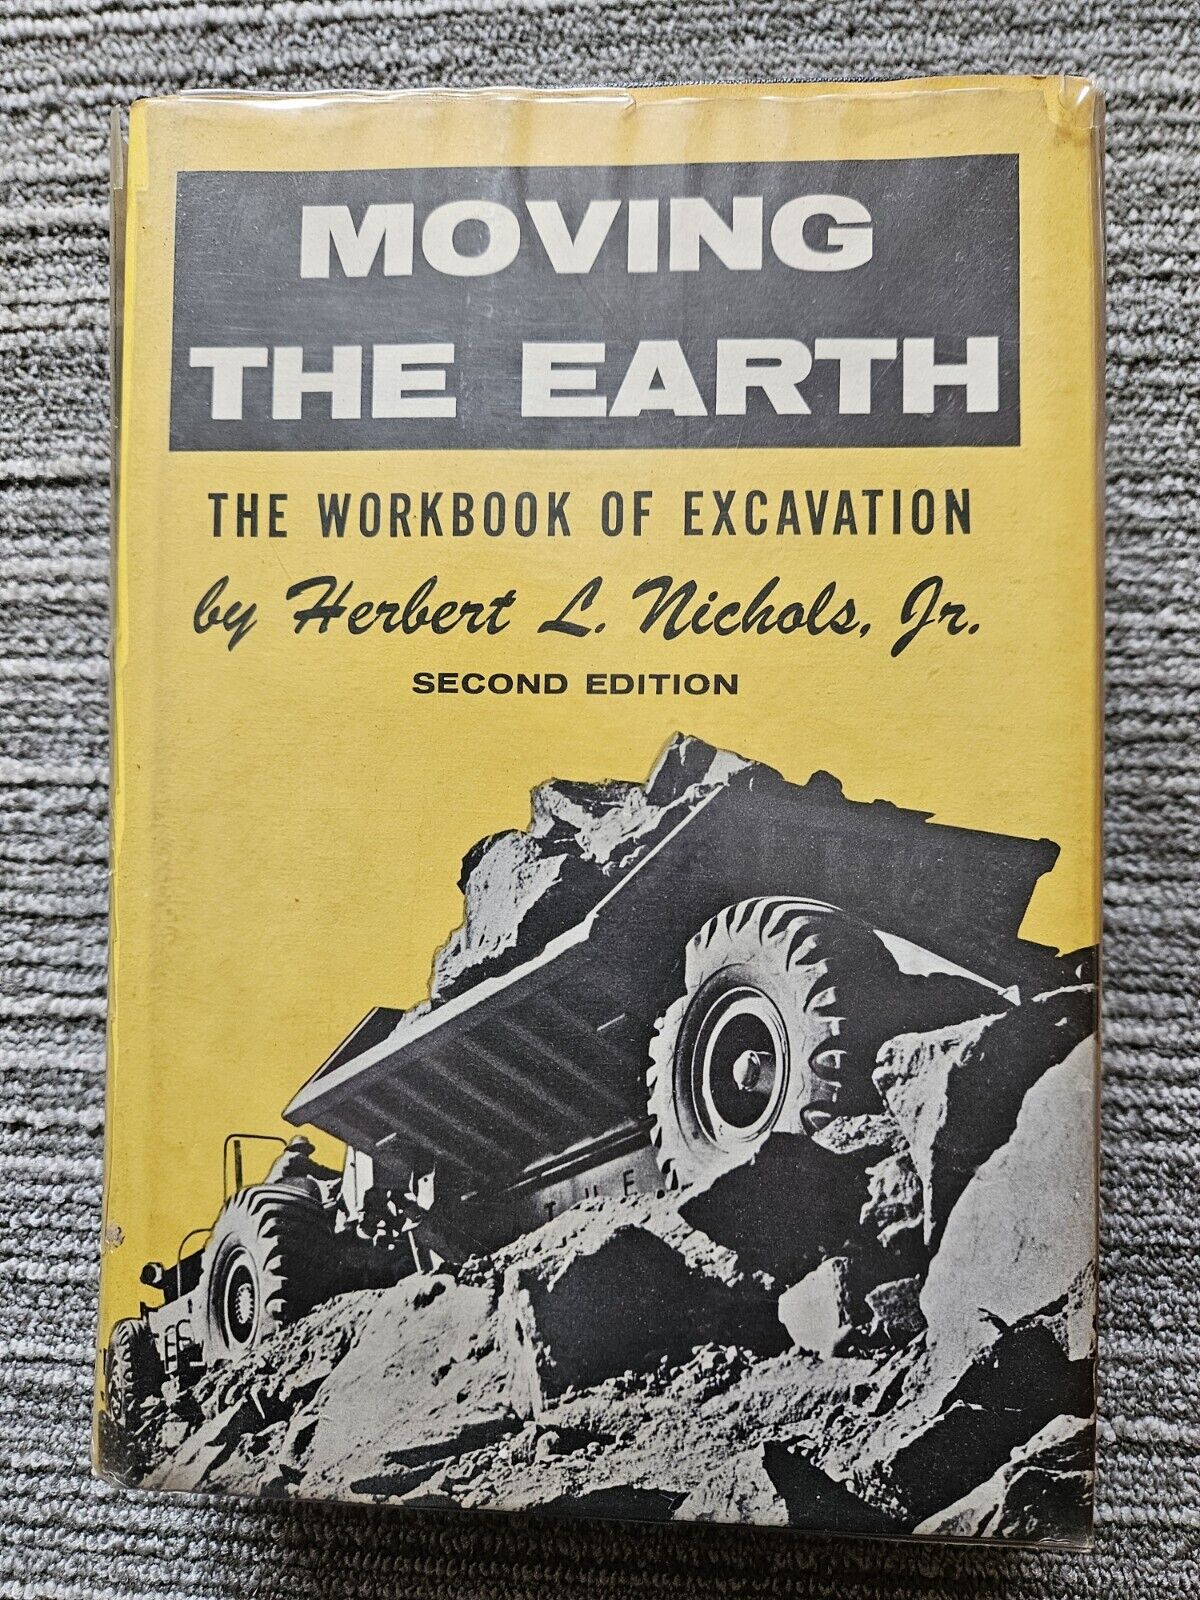 Moving the Earth: The Workbook of Excavation, by Herbert L Nichols 1970